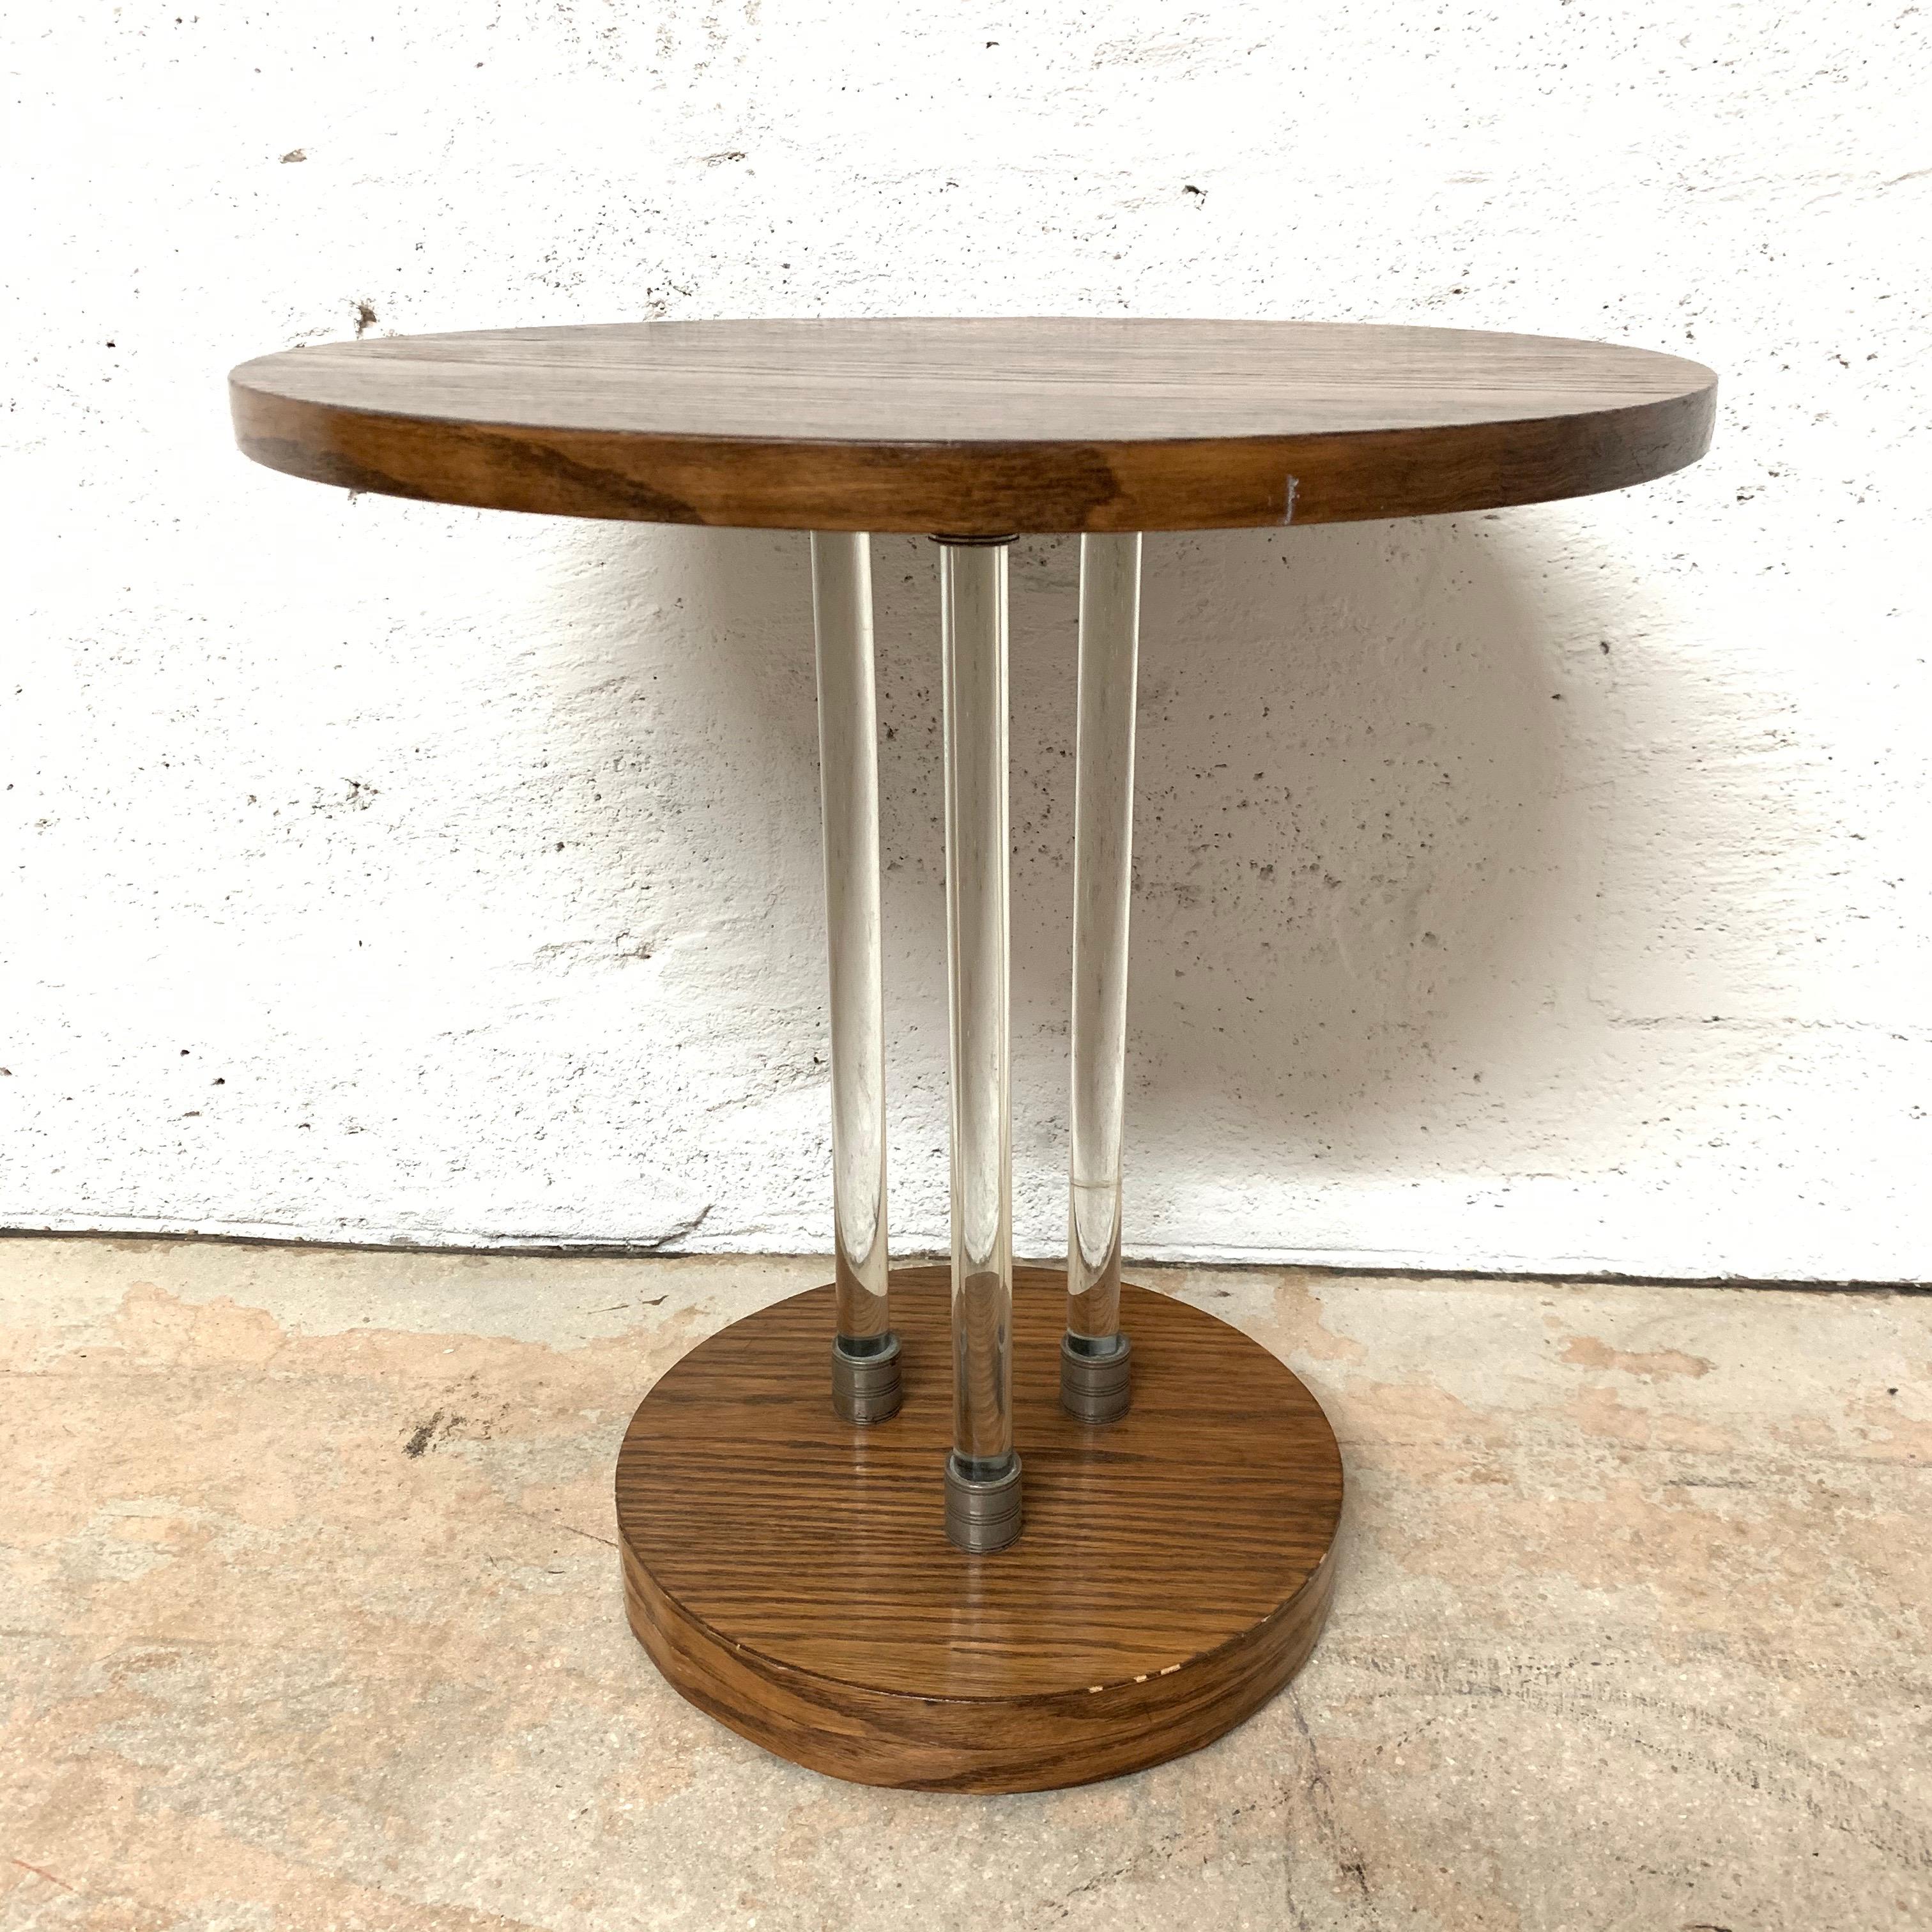 Unique pair of 20th Century Art Deco side or end tables rendered in oak veneer with glass rods and nickeled brass appointments, France, 1930s.